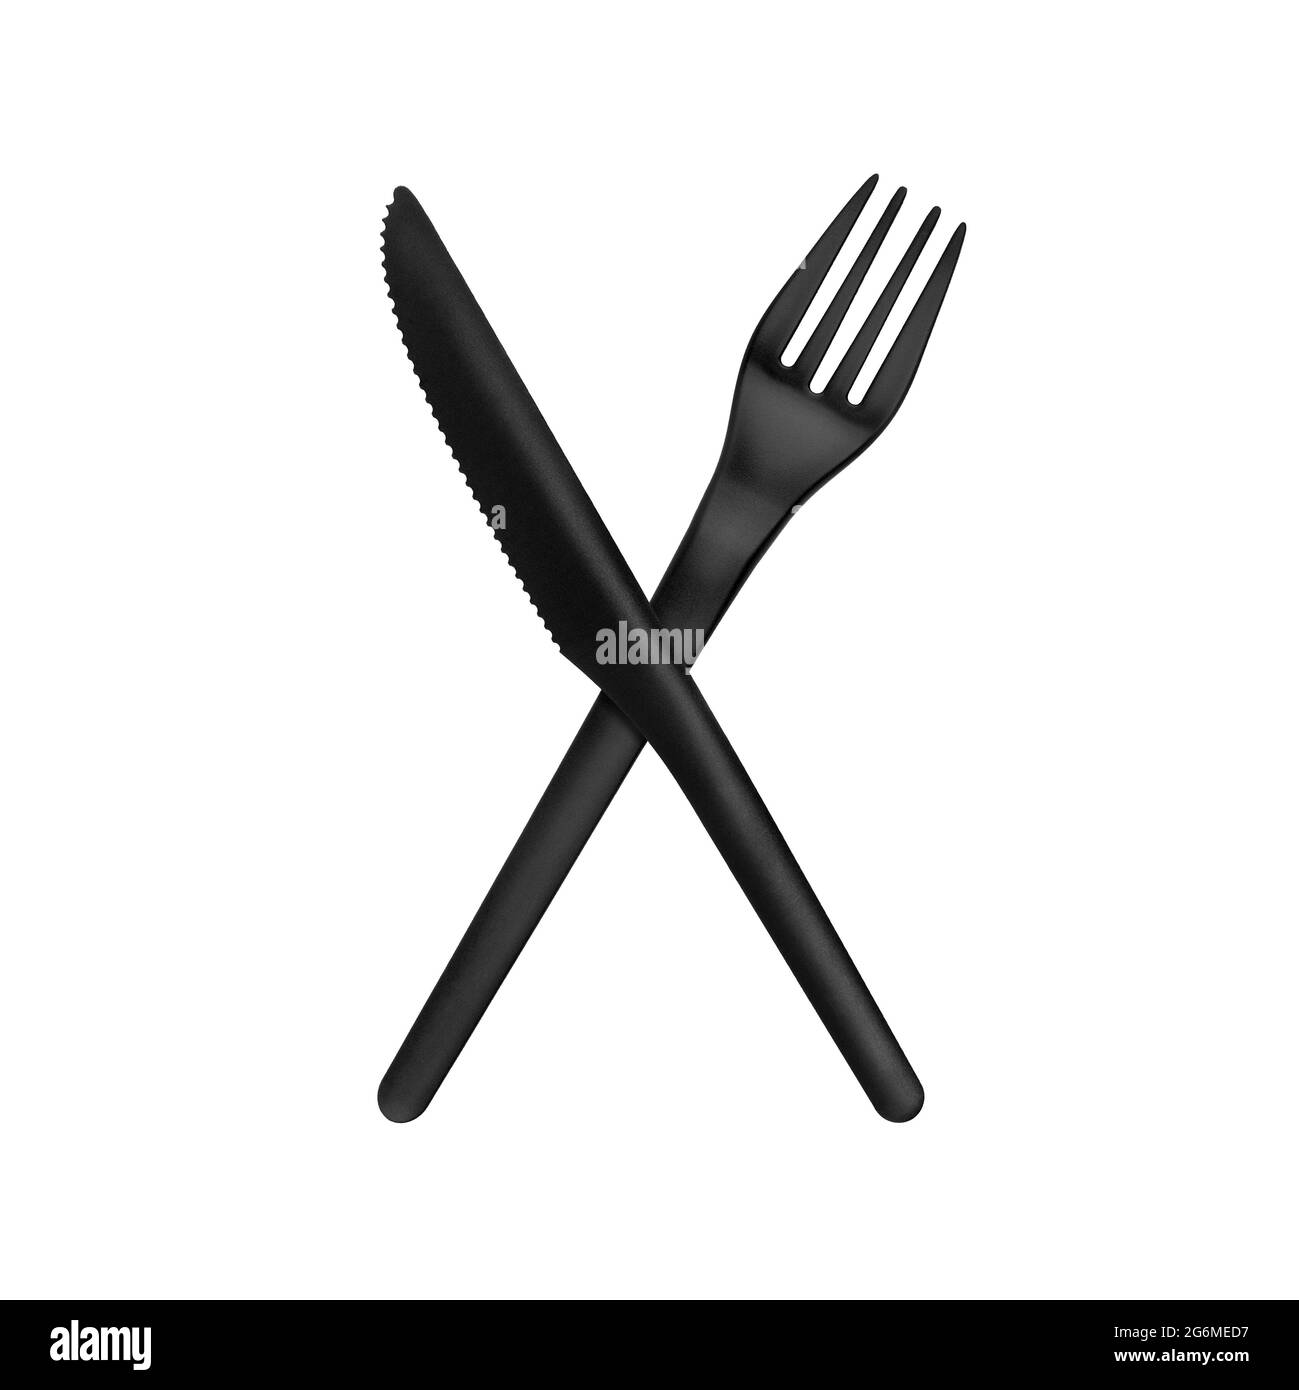 Plastic knife and fork set white background isolated closeup, disposable plastic tableware, one-off black plastic fork and knife, kitchen utensil Stock Photo